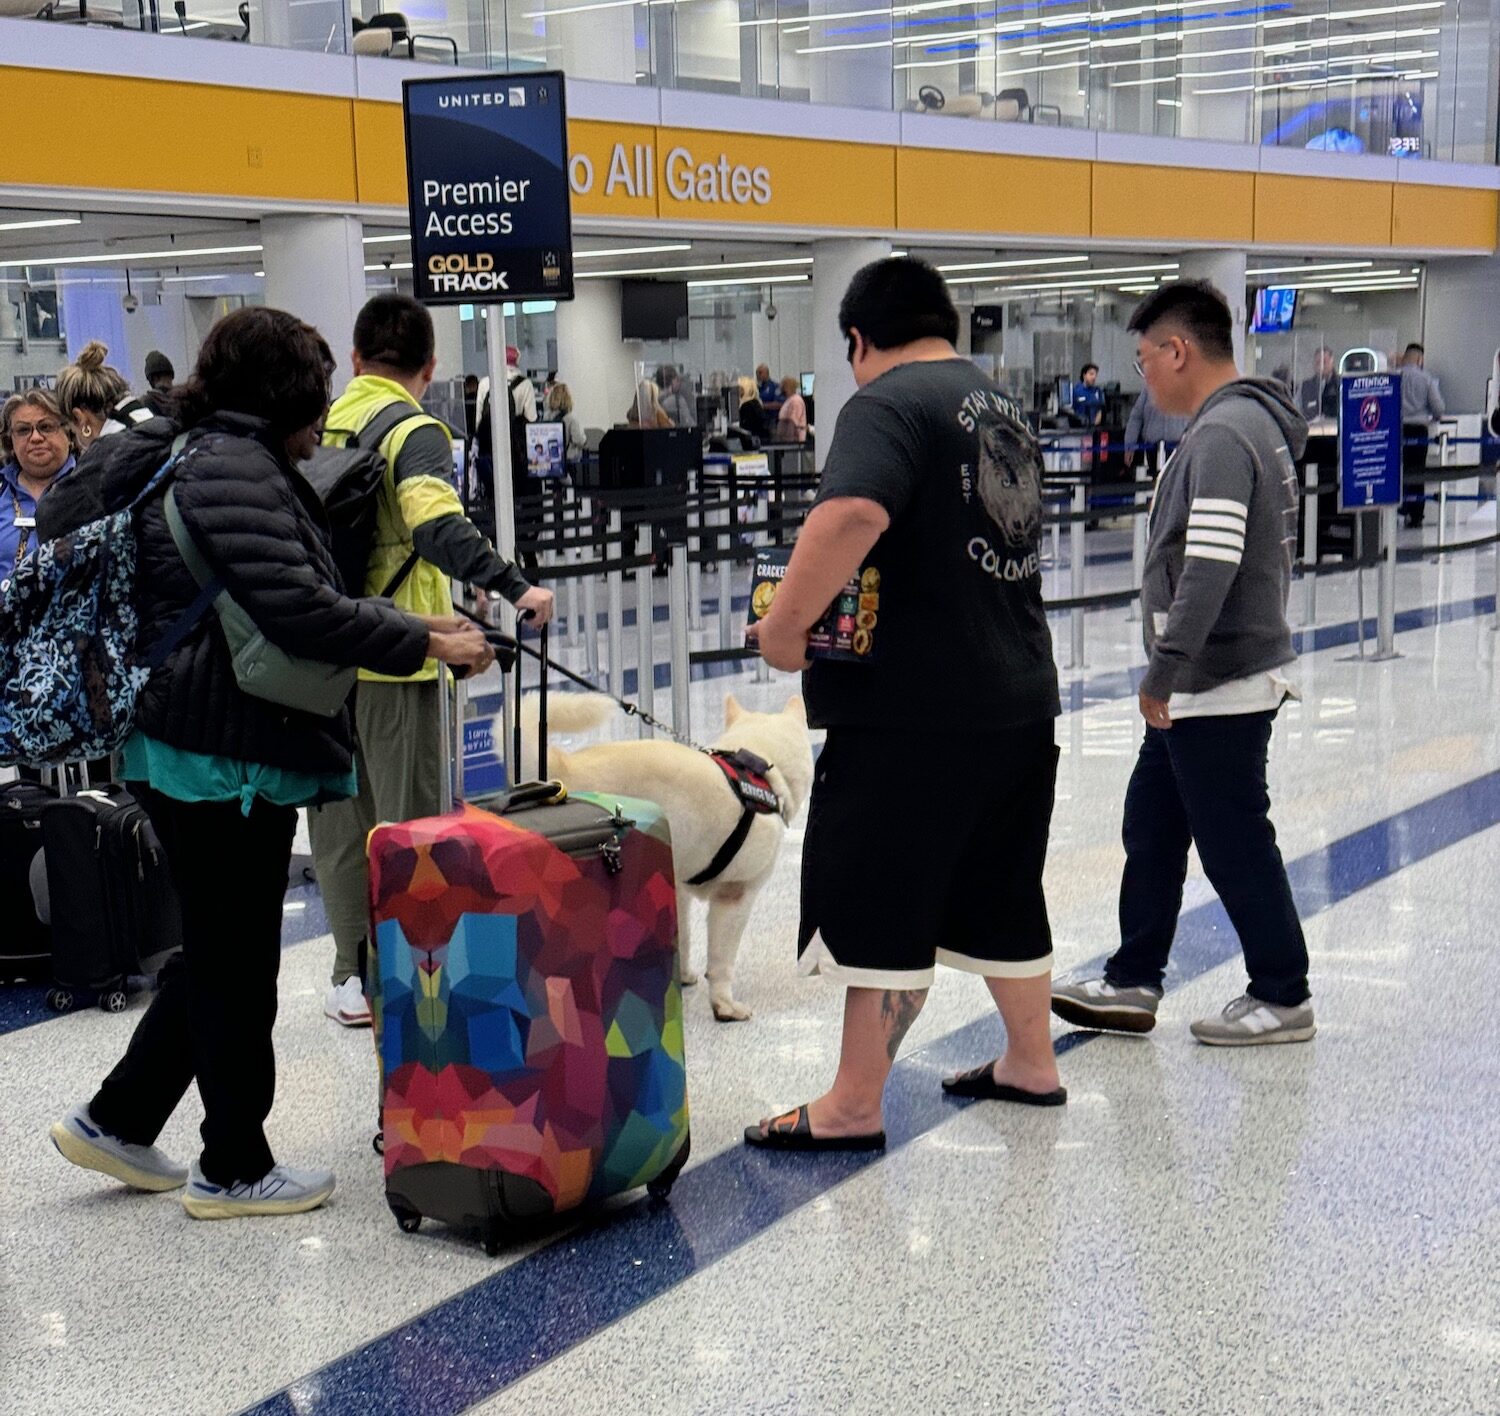 a group of people with luggage in an airport